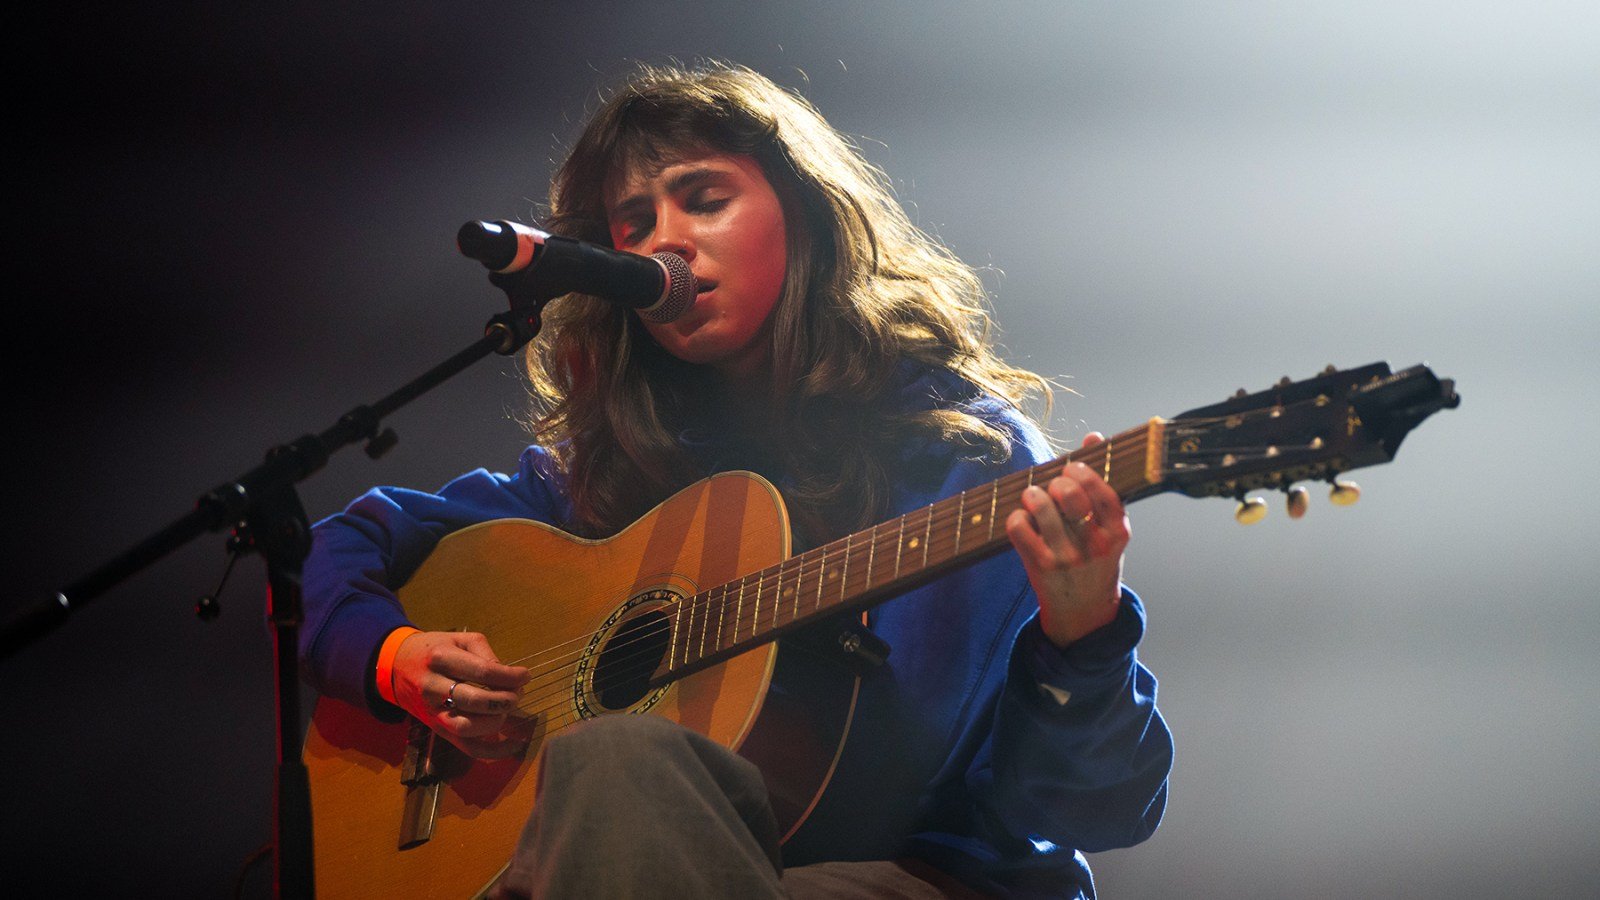 Do You Need a Reason to Get Out of the House? Catch Clairo on Tour This Fall